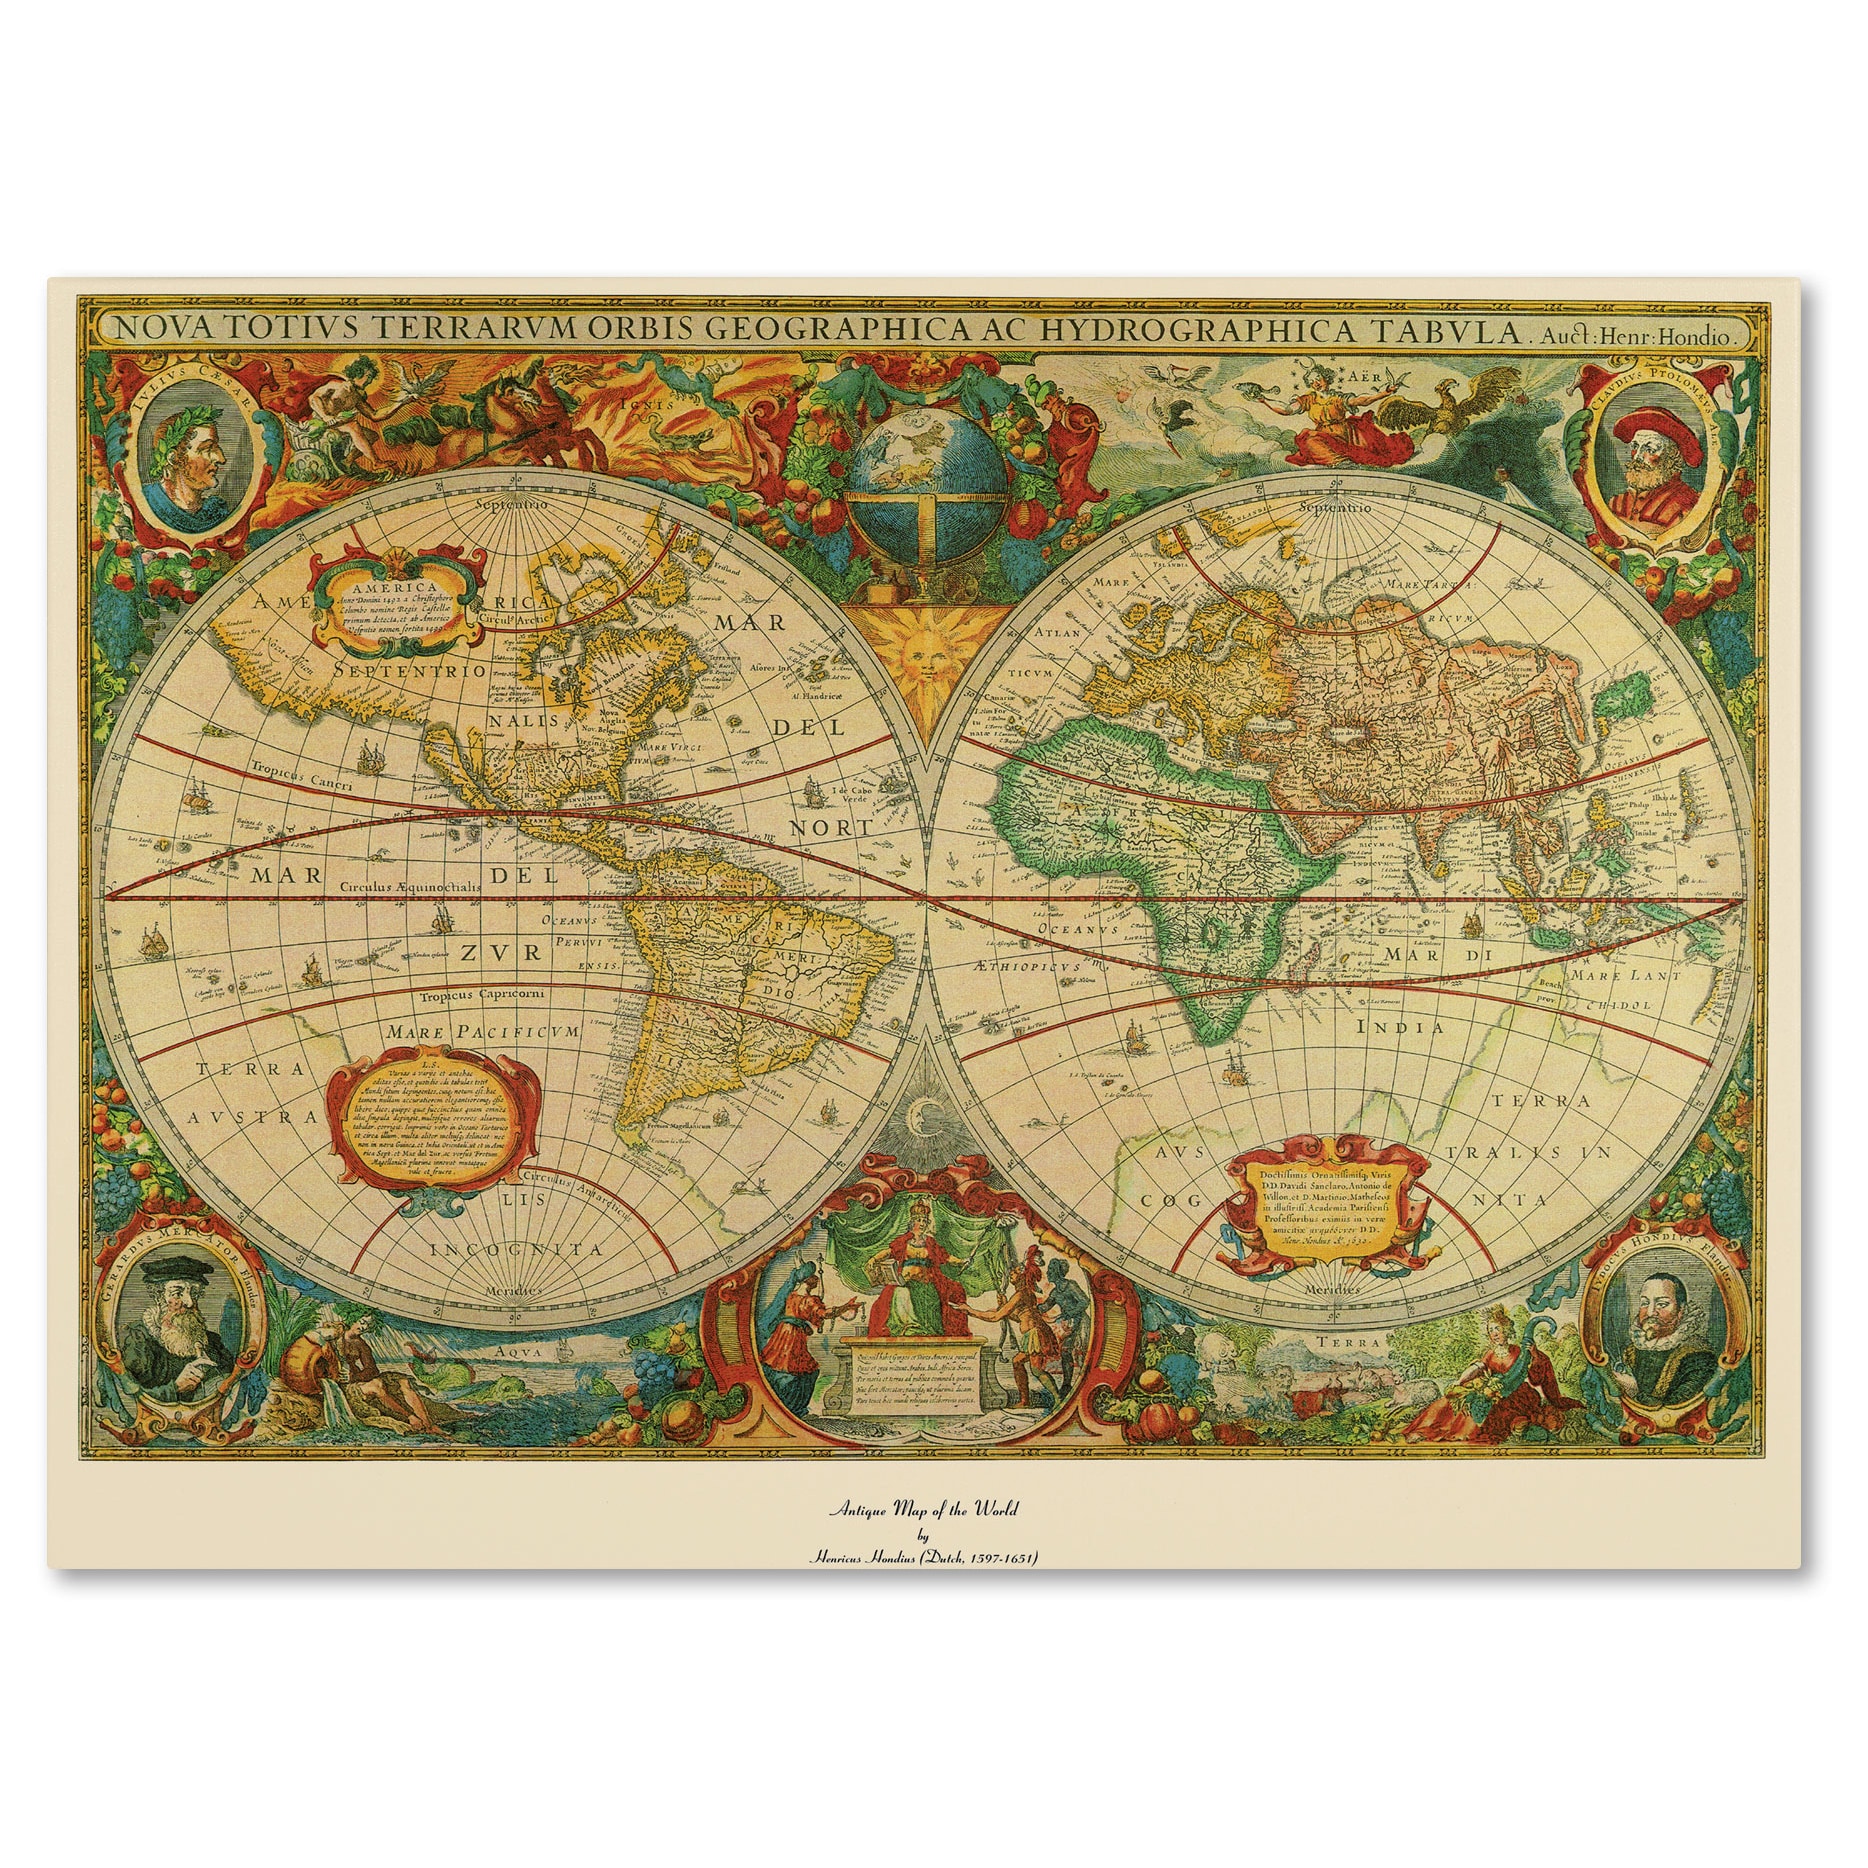 https://ak1.ostkcdn.com/images/products/2767773/Old-World-Map-Painting-on-Canvas-2fce7ca2-7950-43e3-8f16-dde722d37976.jpg